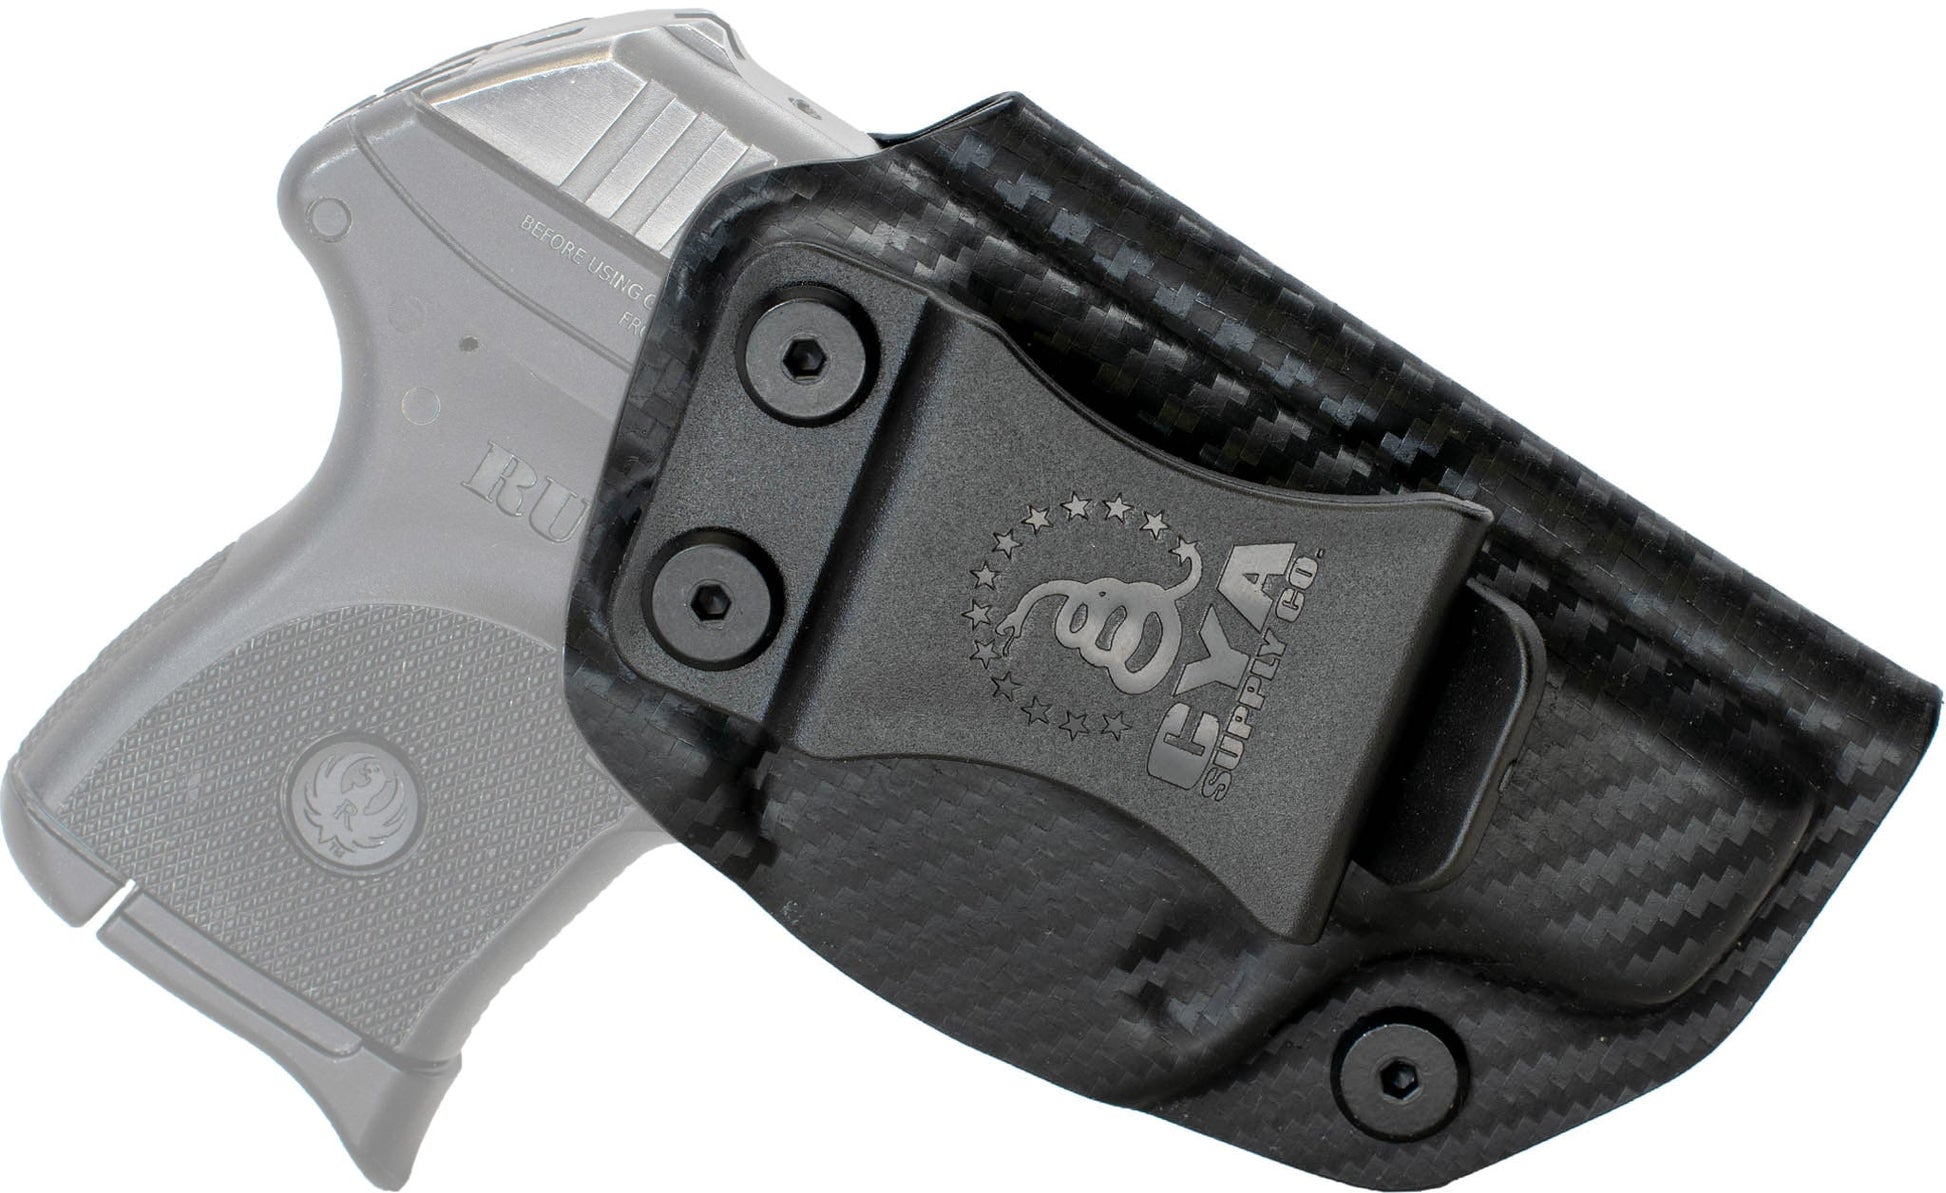 Ruger LCP 380 Holster, Base IWB Holster